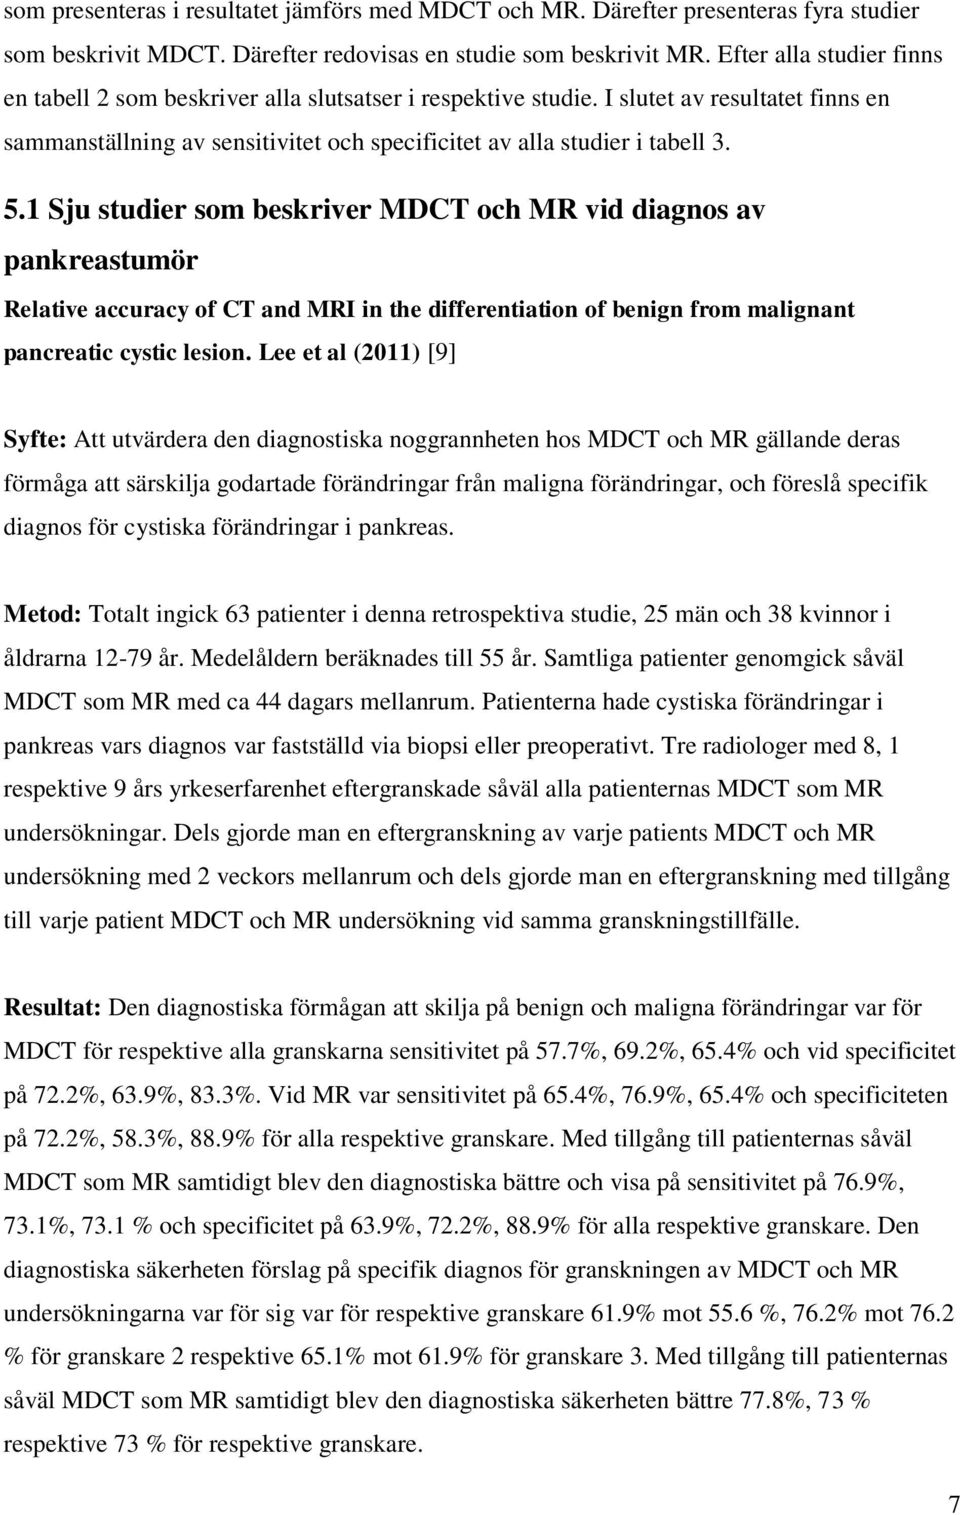 1 Sju studier som beskriver MDCT och MR vid diagnos av pankreastumör Relative accuracy of CT and MRI in the differentiation of benign from malignant pancreatic cystic lesion.